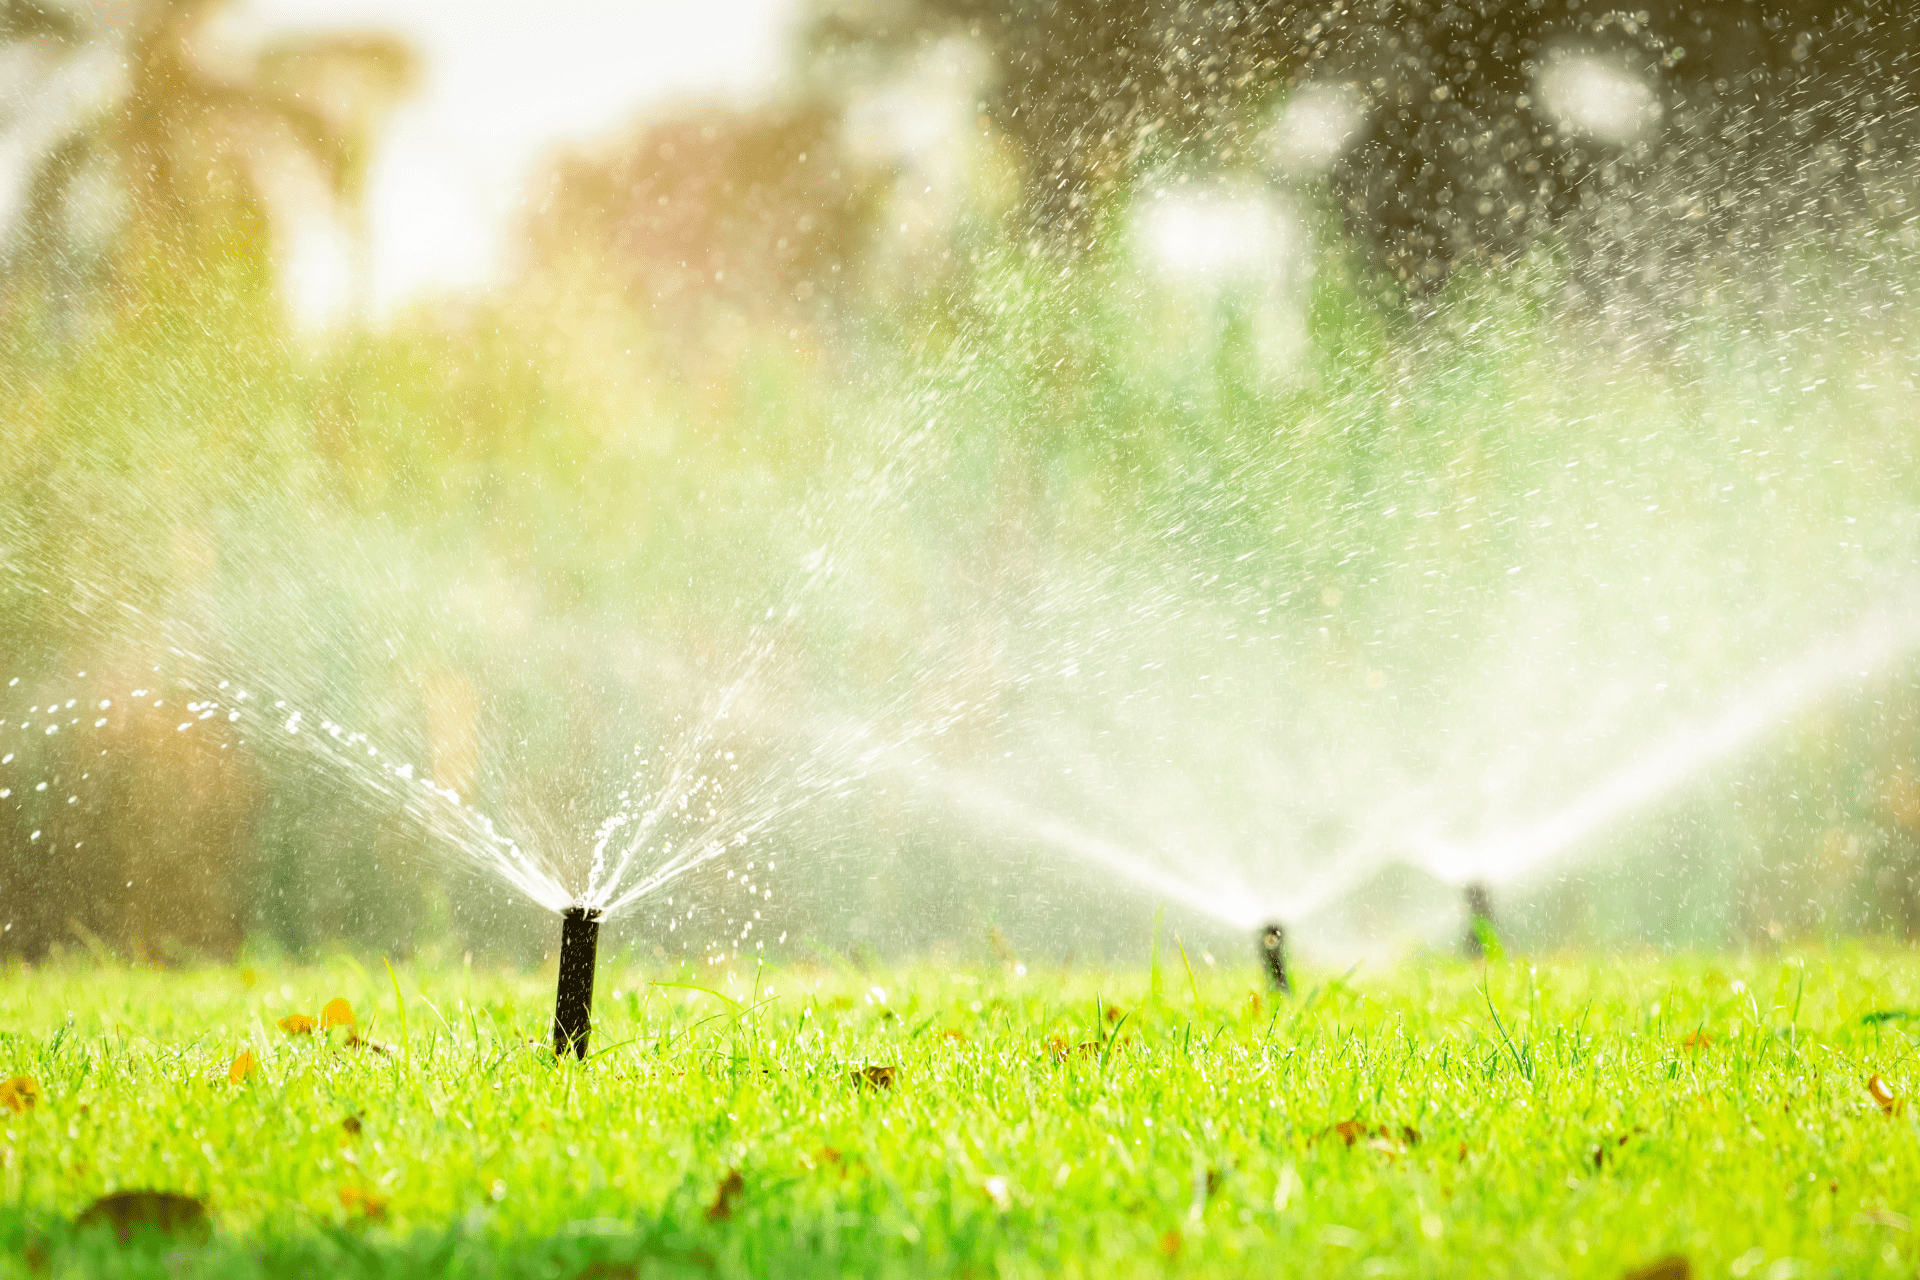 Automatic sprinklers watering grass in a garden